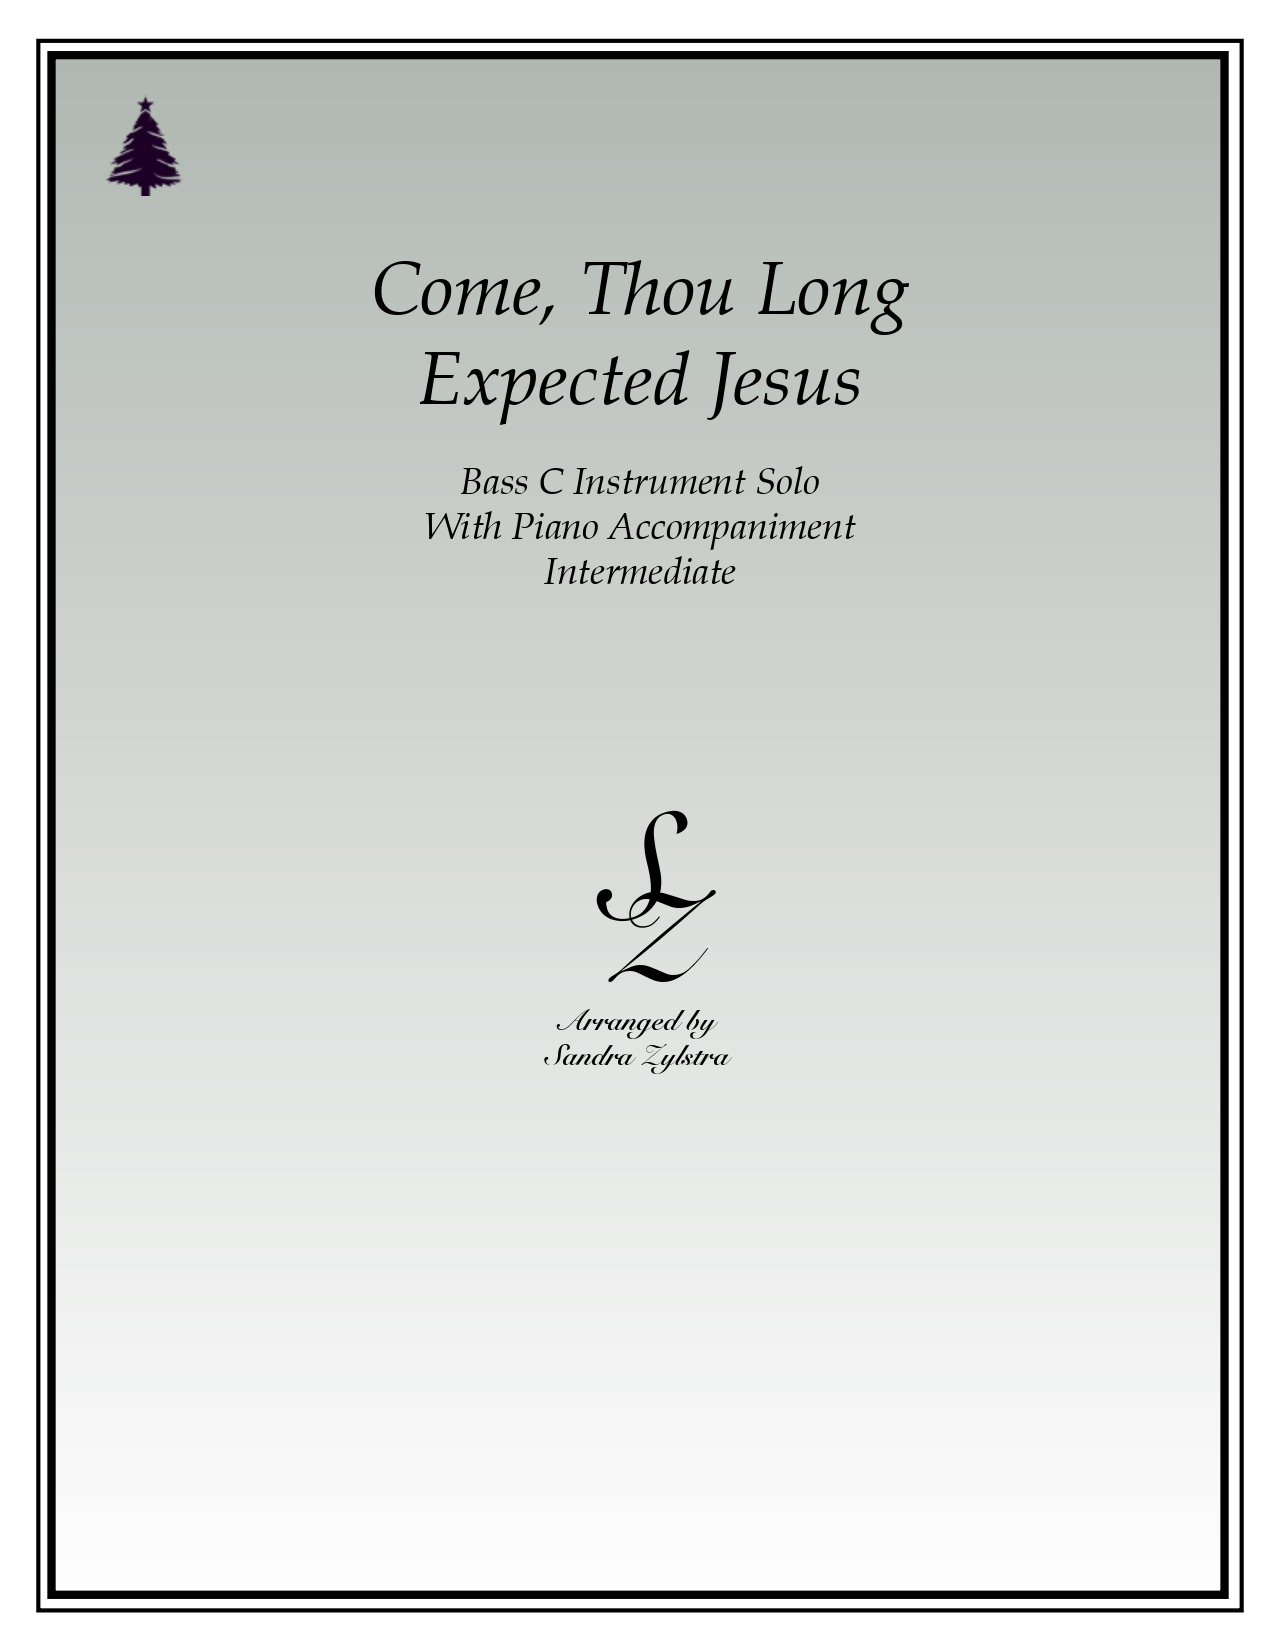 Come Thou Long Expected Jesus bass C instrument solo part cover page 00011